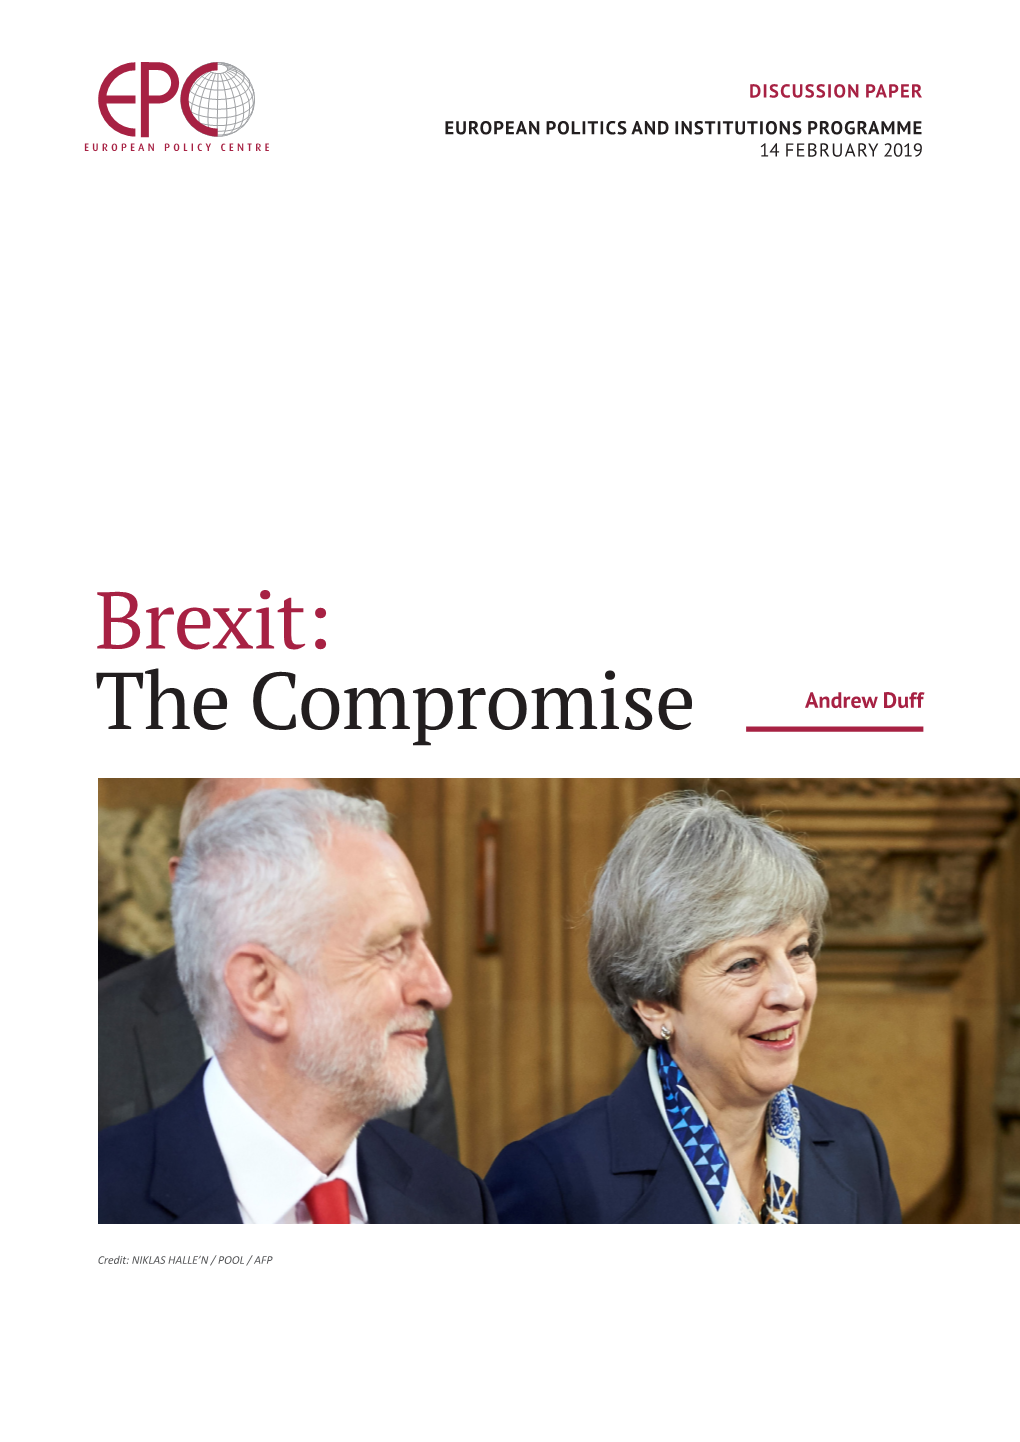 Brexit: the Compromise Andrew Duff